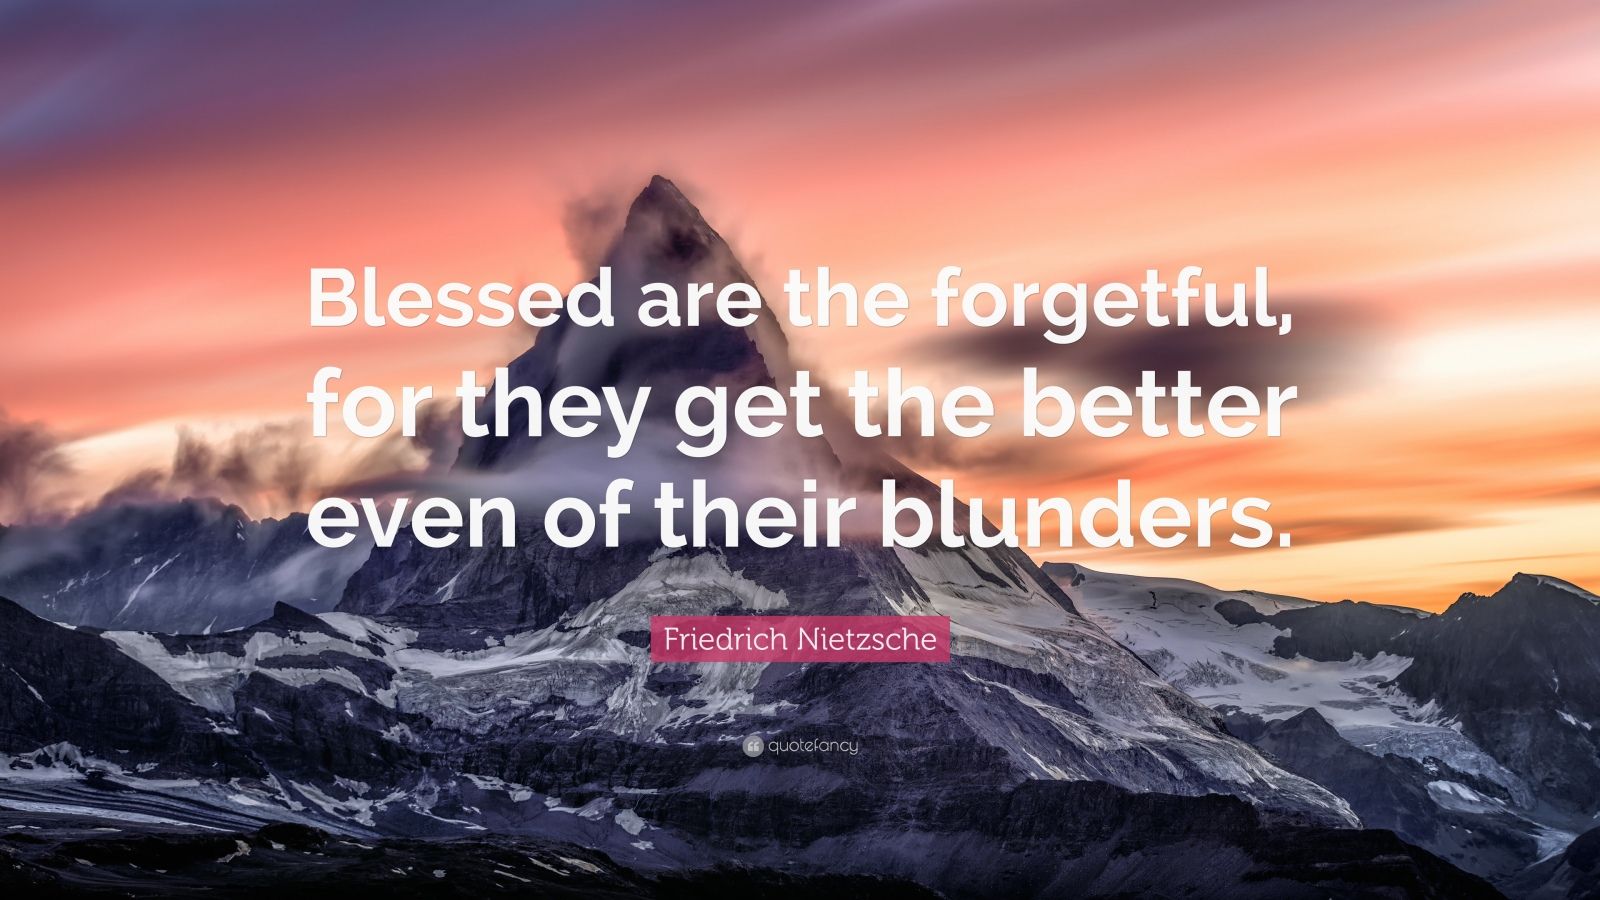 Friedrich Nietzsche Quote: “Blessed are the forgetful, for they get the